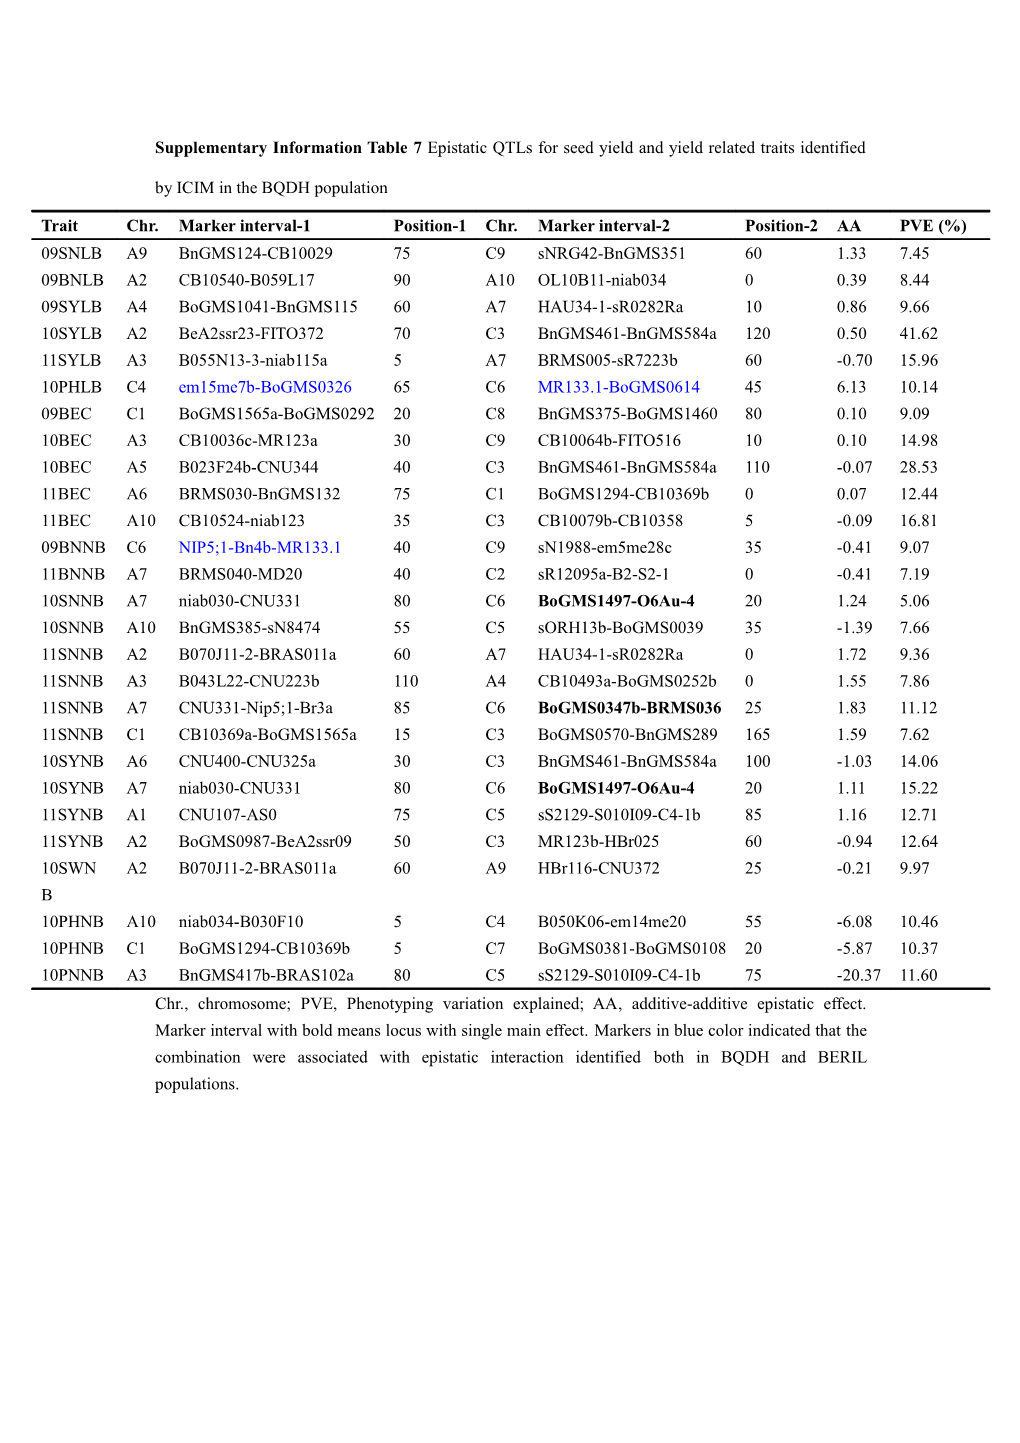 Supplementary Information Table 7 Epistatic Qtls for Seed Yield and Yield Related Traits